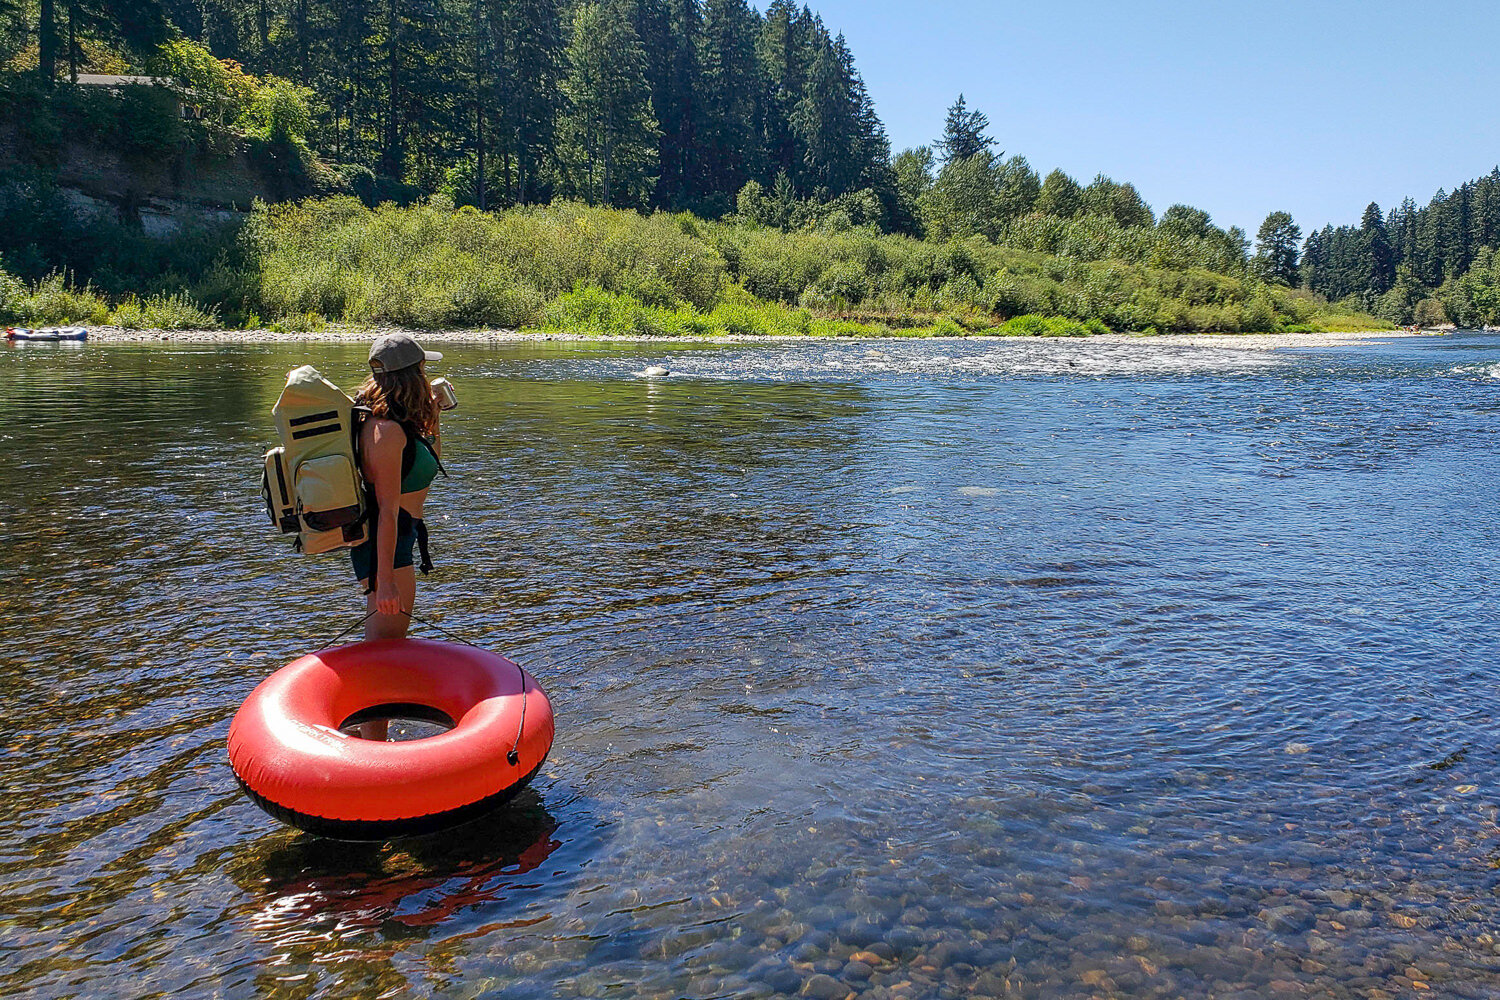 the IceMule BOSS IS GREAT FOR ACTIVITIES NEAR WATER SINCE IT’S FULLY WATERPROOF AND IT FLOATS